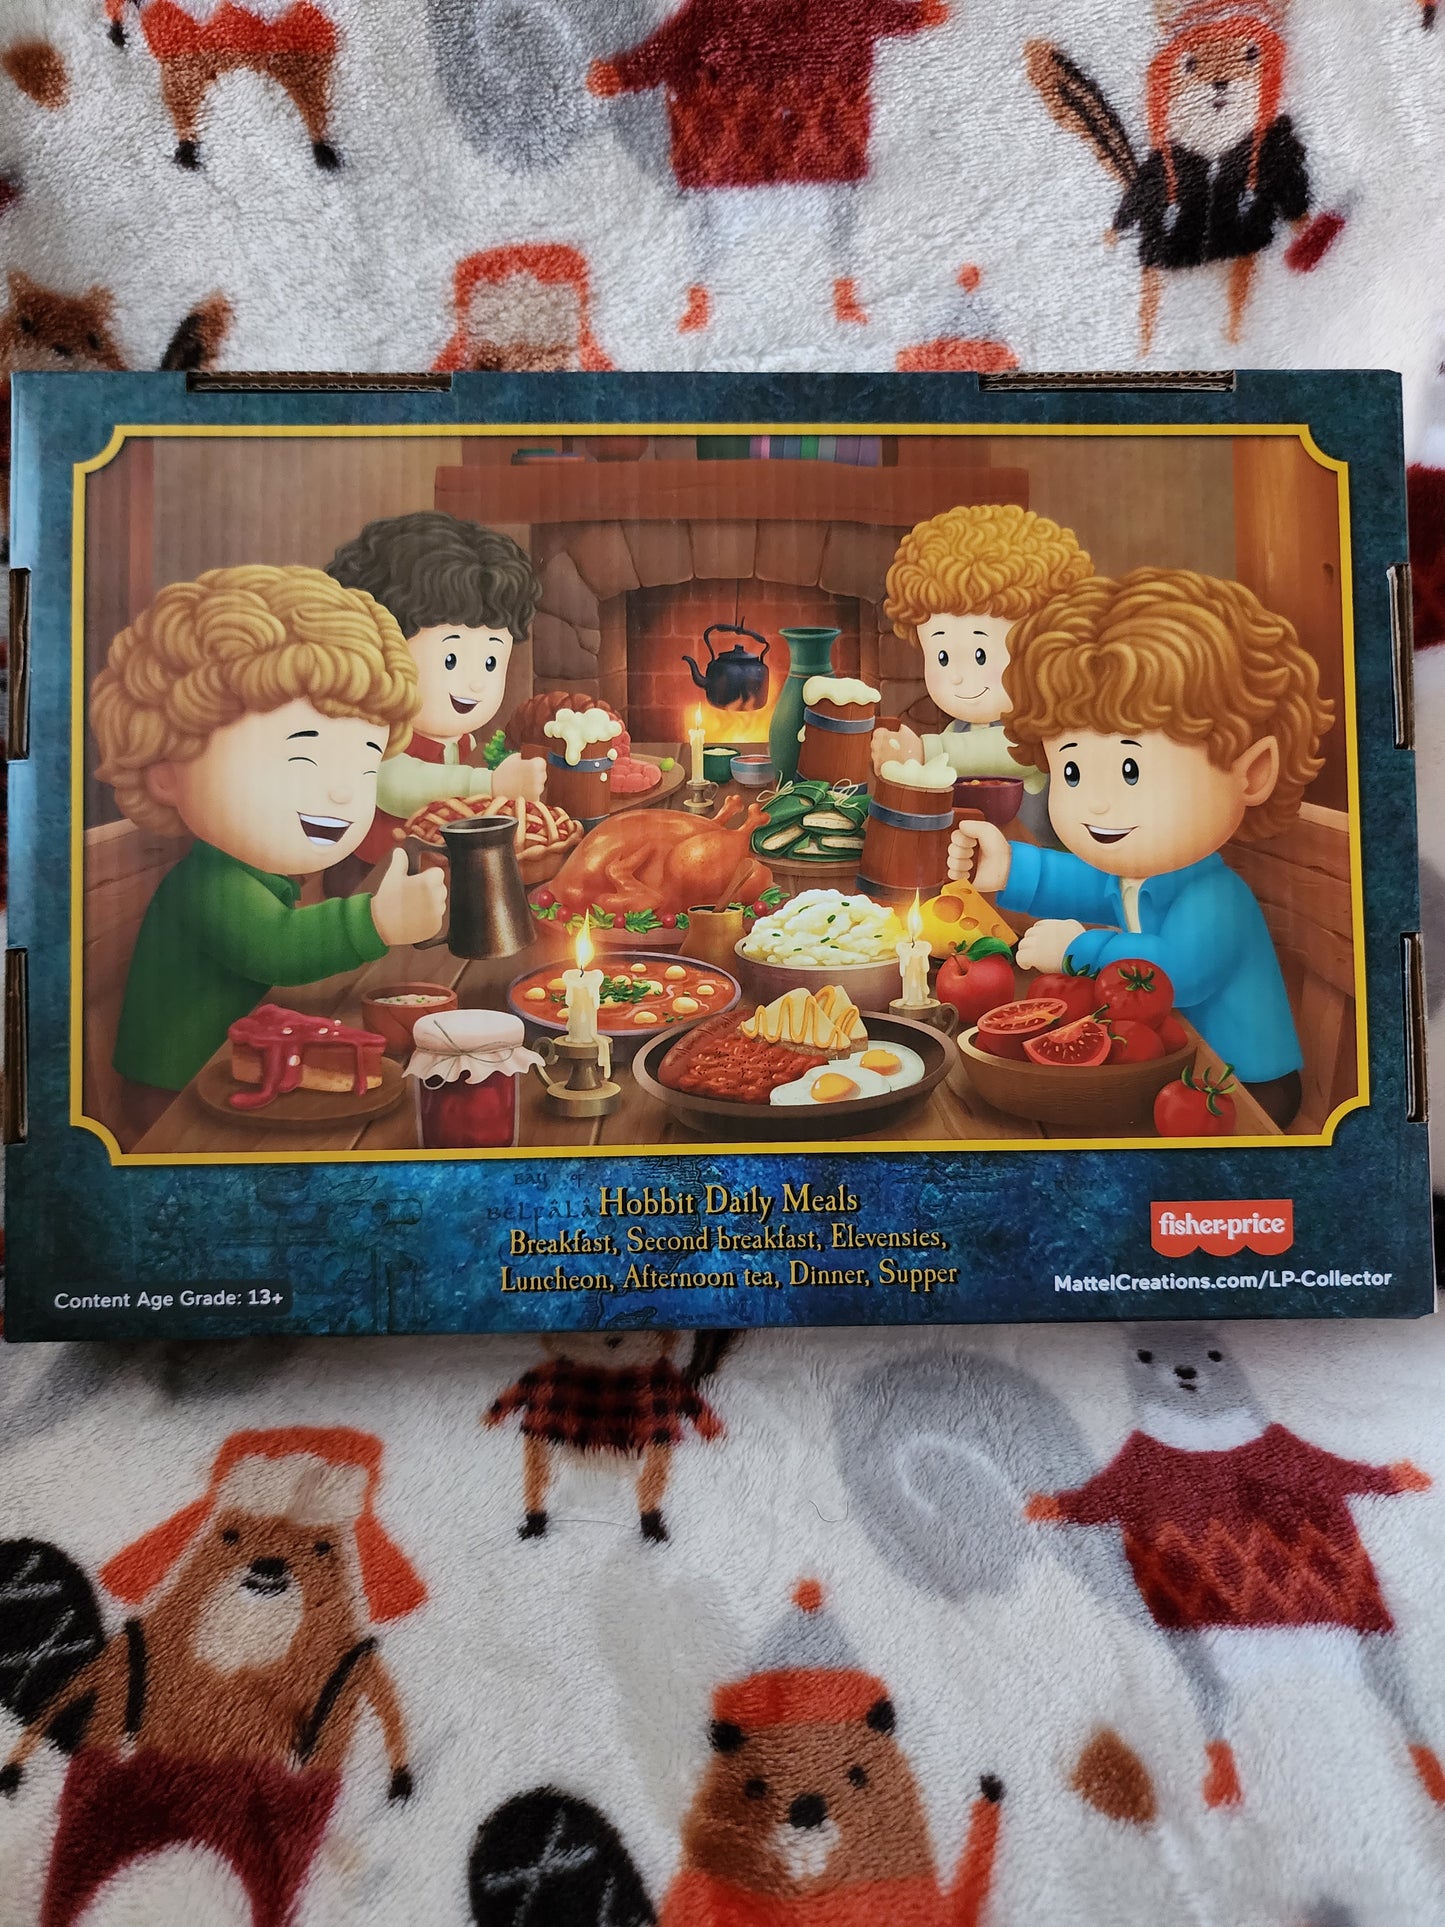 Fisher Price Little People Lord of the Rings Hobbits Collector Set